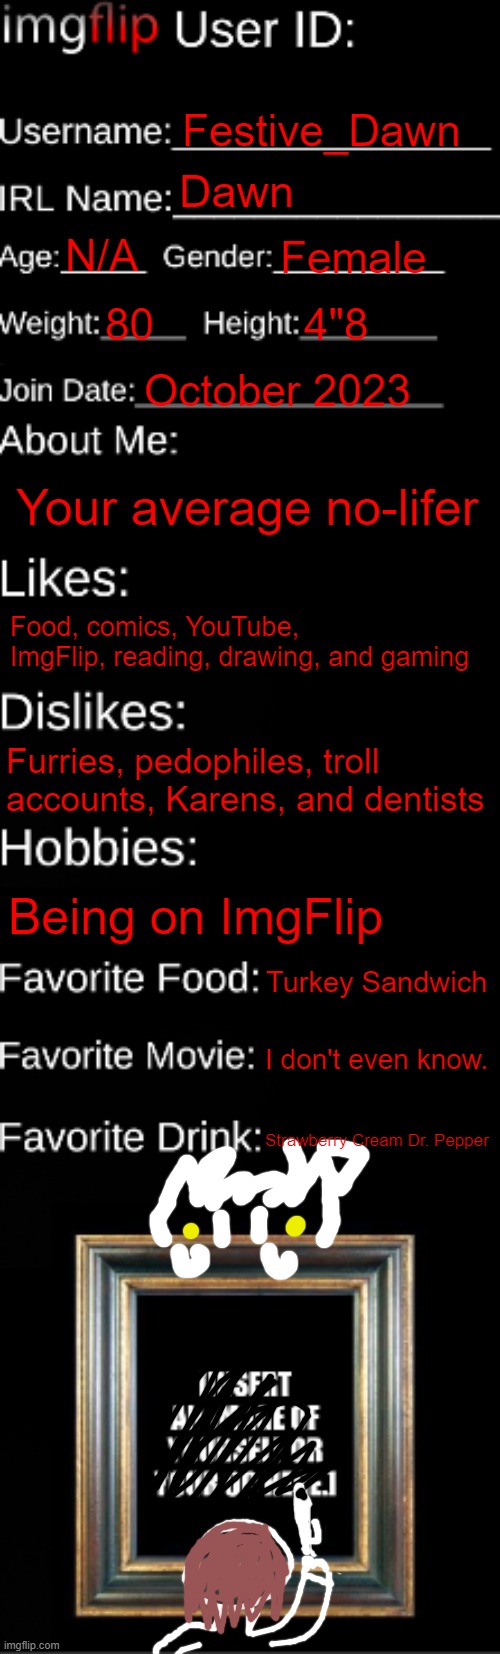 My ImgFlip ID card (had to give in...) | Festive_Dawn; Dawn; N/A; Female; 80; 4"8; October 2023; Your average no-lifer; Food, comics, YouTube, ImgFlip, reading, drawing, and gaming; Furries, pedophiles, troll accounts, Karens, and dentists; Being on ImgFlip; Turkey Sandwich; I don't even know. Strawberry Cream Dr. Pepper | image tagged in imgflip id card | made w/ Imgflip meme maker